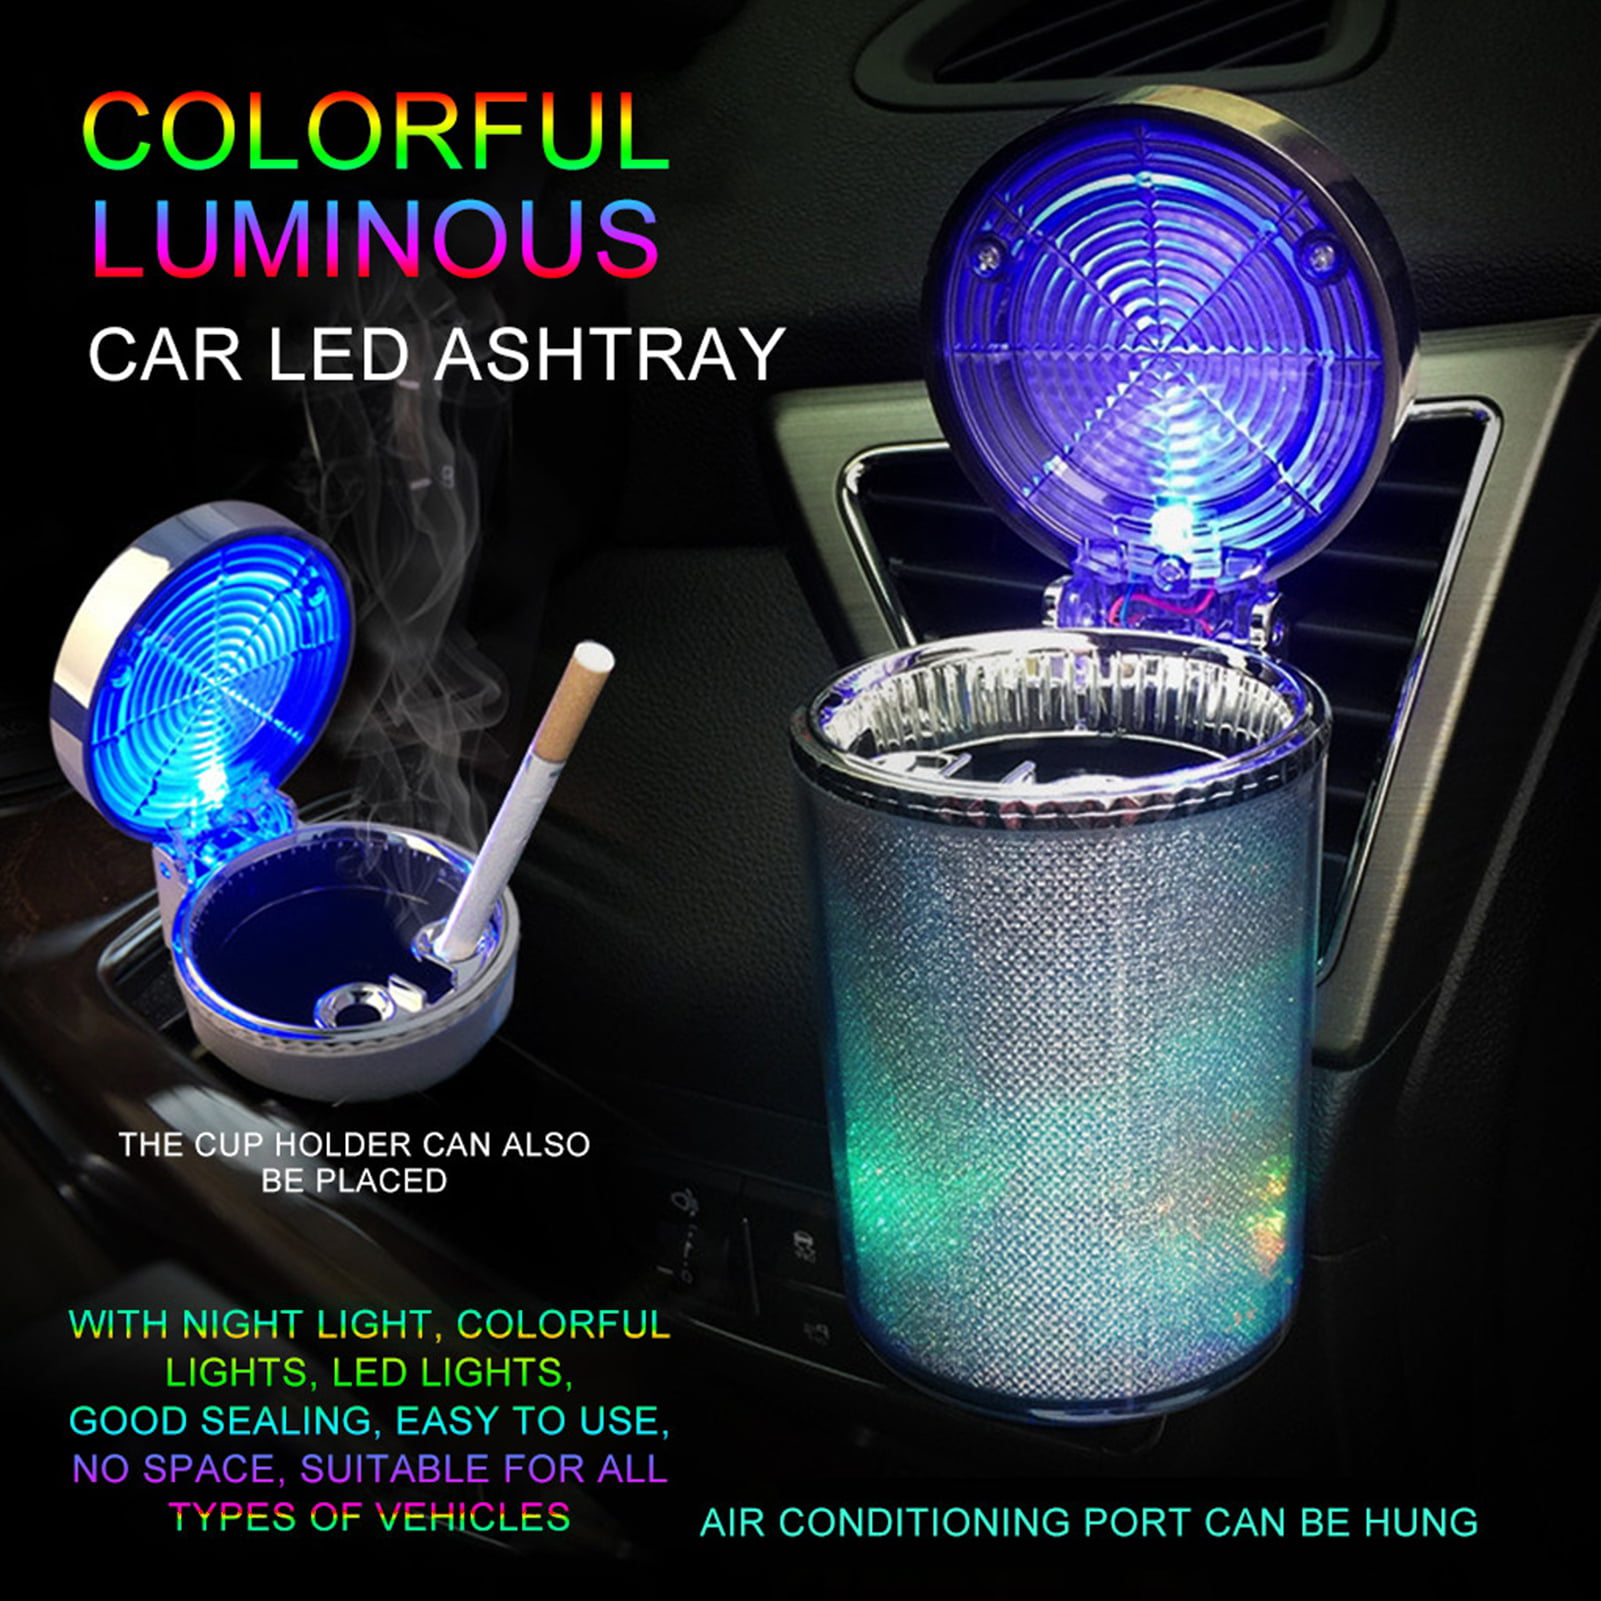 TrexNYC Car Ashtray with Blue LED Light and Portable Ashtray Design - Ideal for Car, Home, and Office